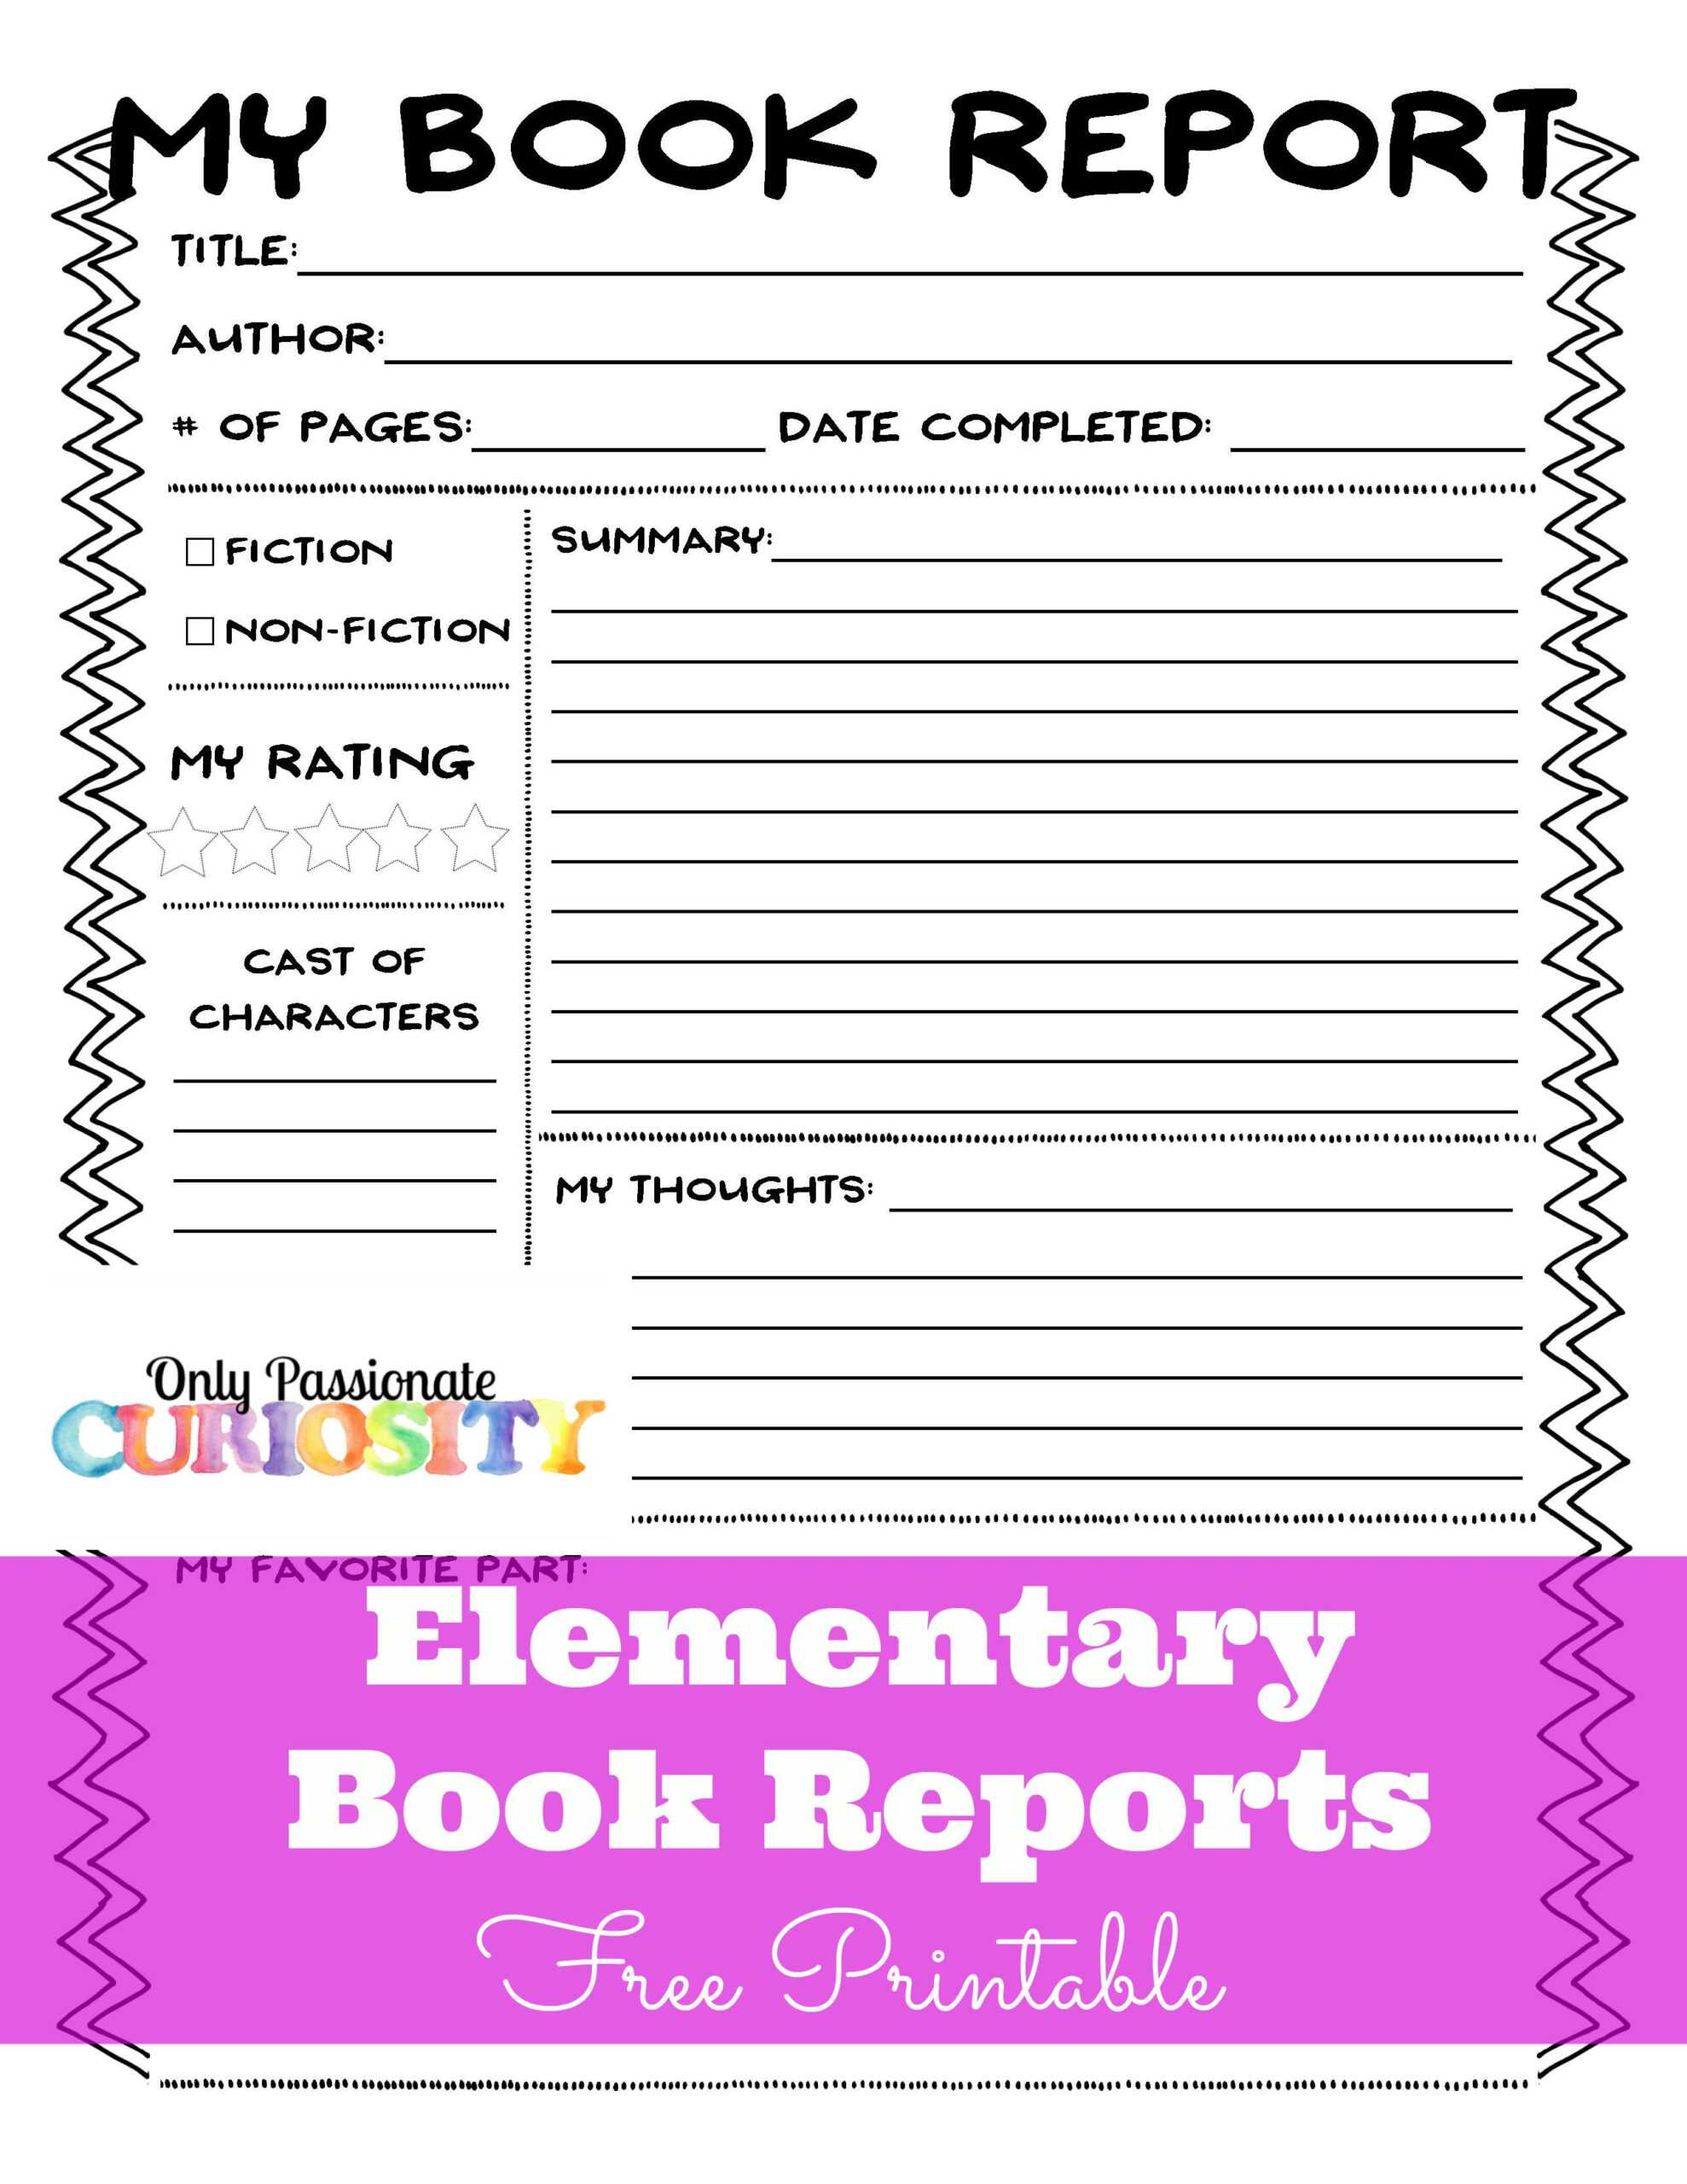 Sandwich Book Report Printout With Regard To Sandwich Book Report Printable Template